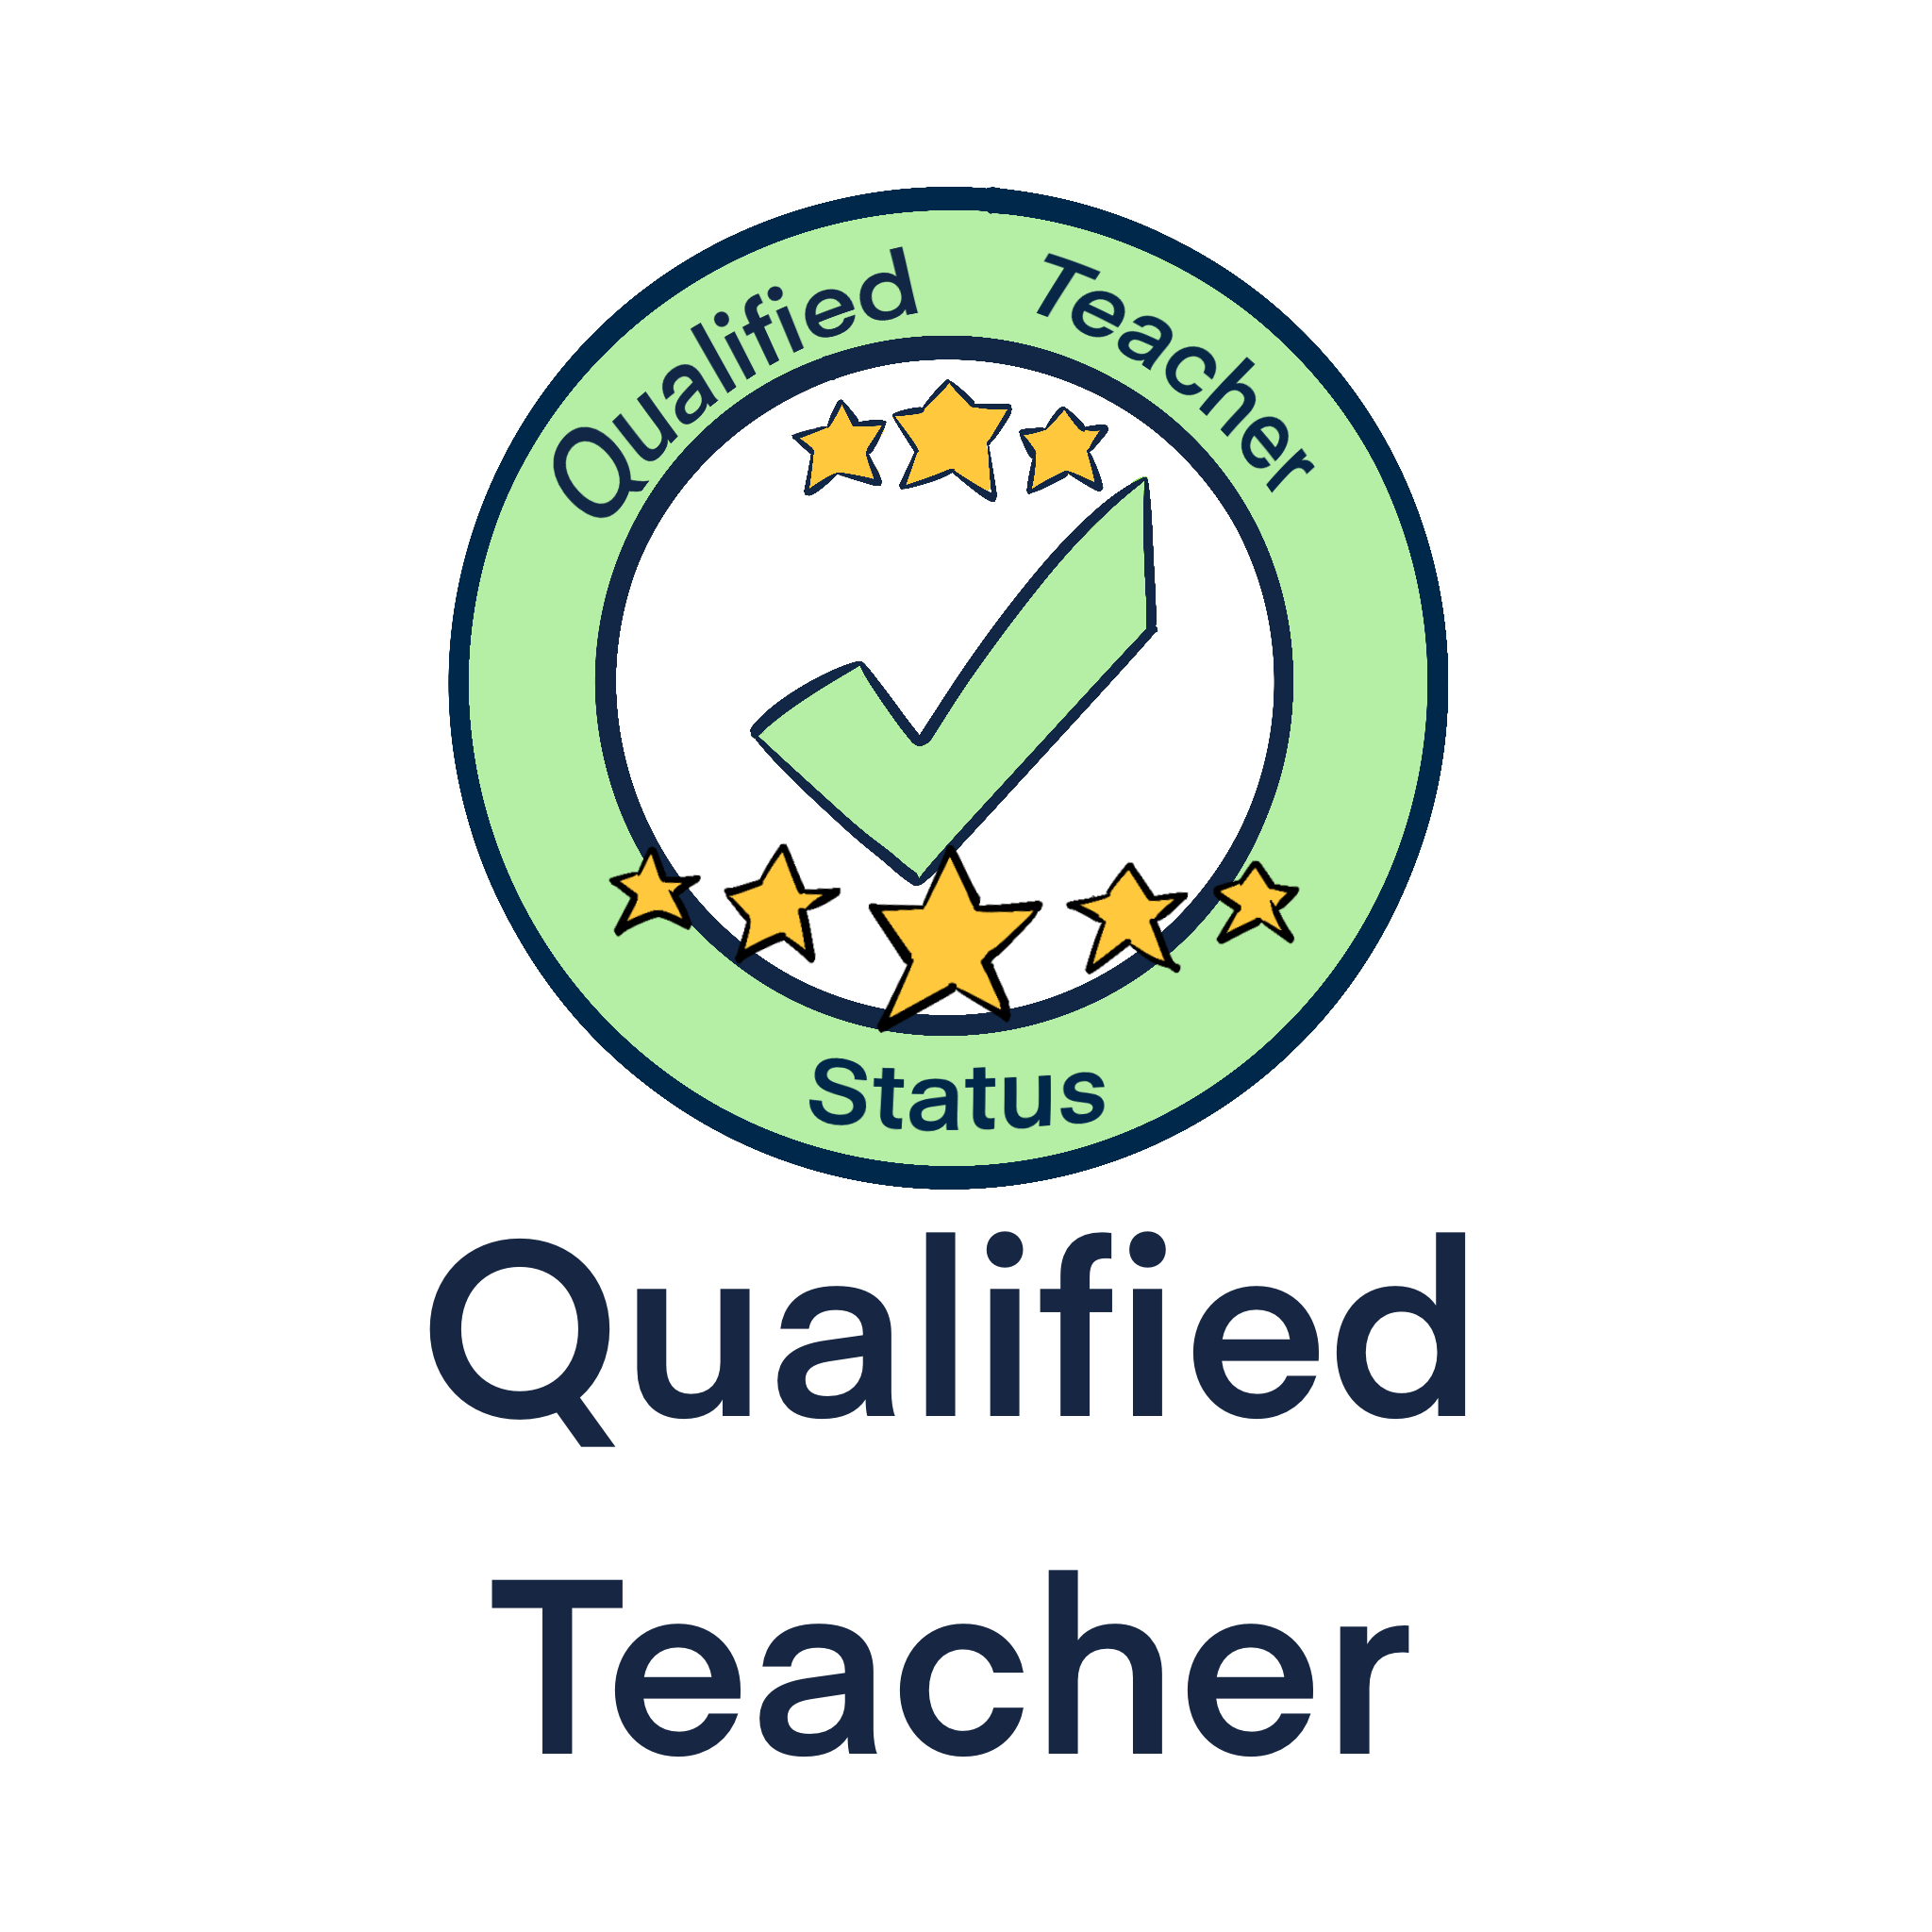 Like all our tutors, Baxter is a qualified teacher